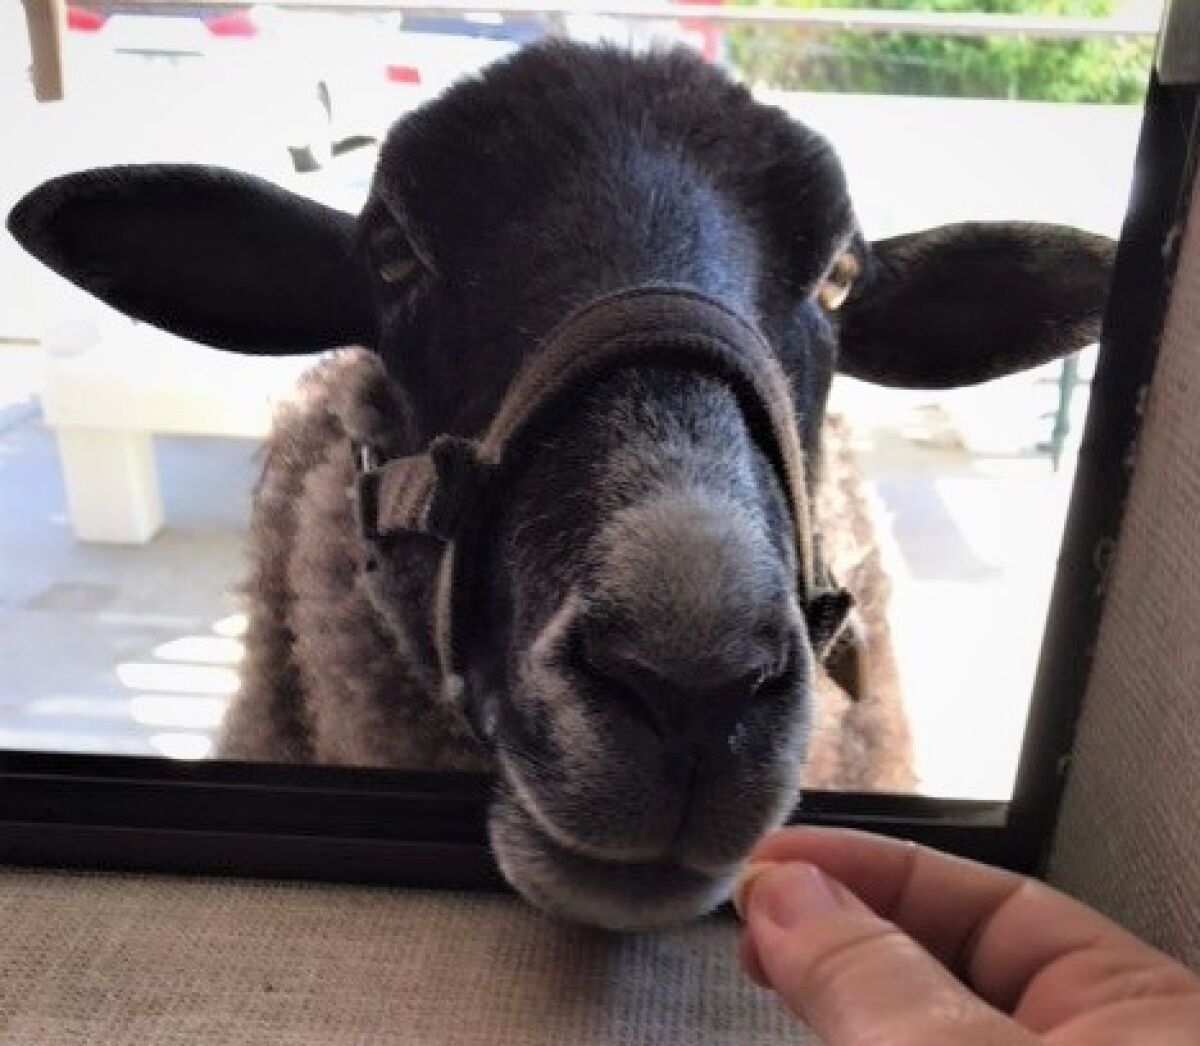 Have you ever Zoomed with a goat? Helen Woodward Animal Center puts animals on video chats with seniors.